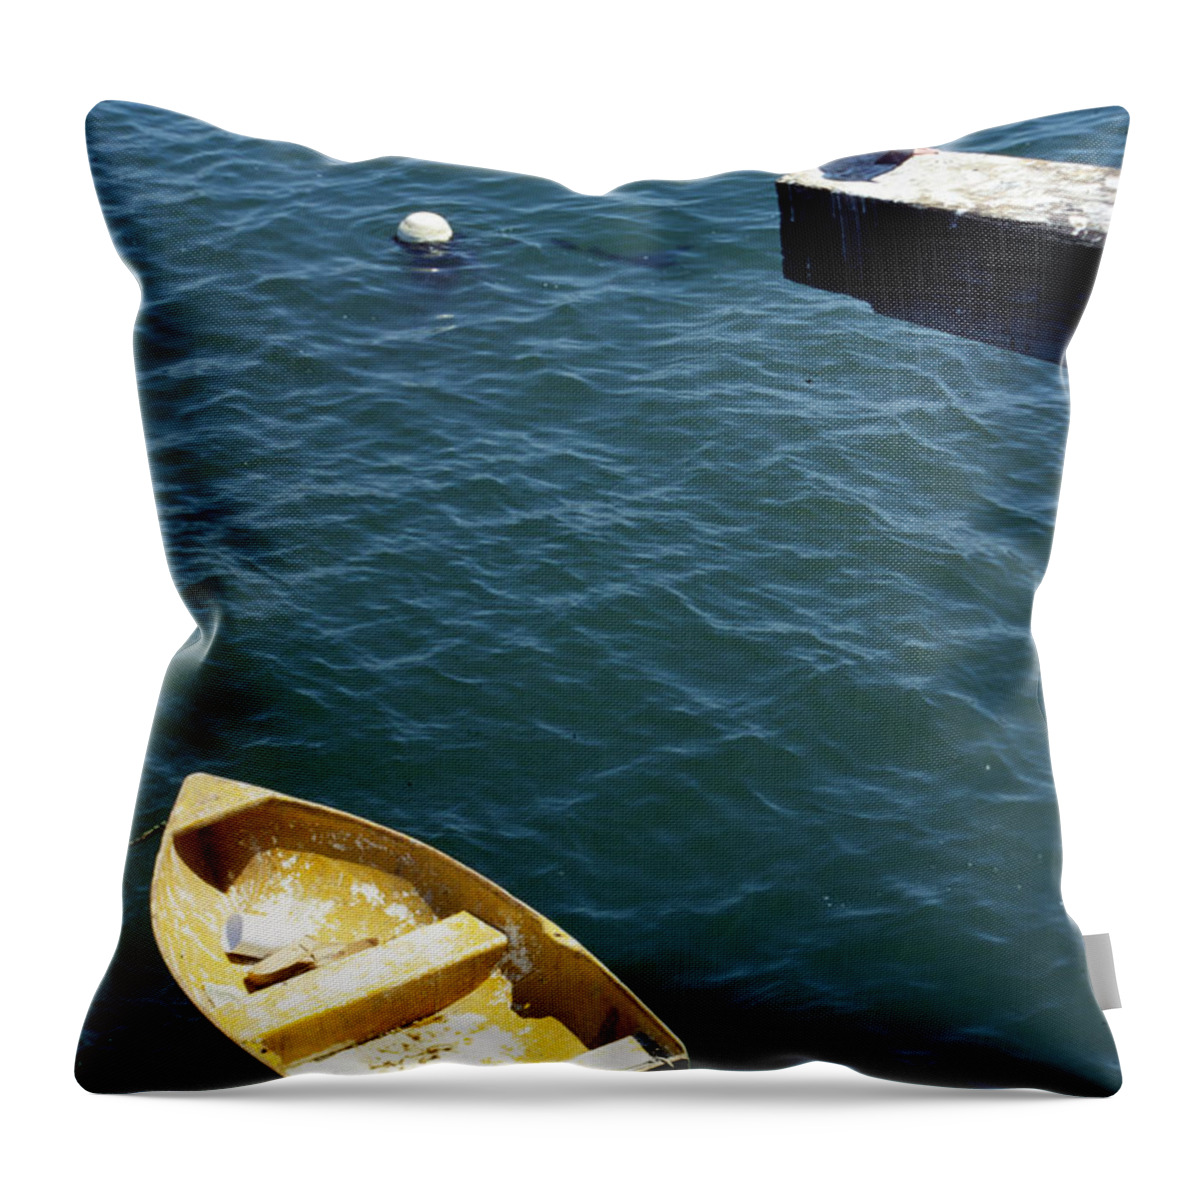 Ocean Throw Pillow featuring the photograph Bird Over Boat. by Spirit Vision Photography